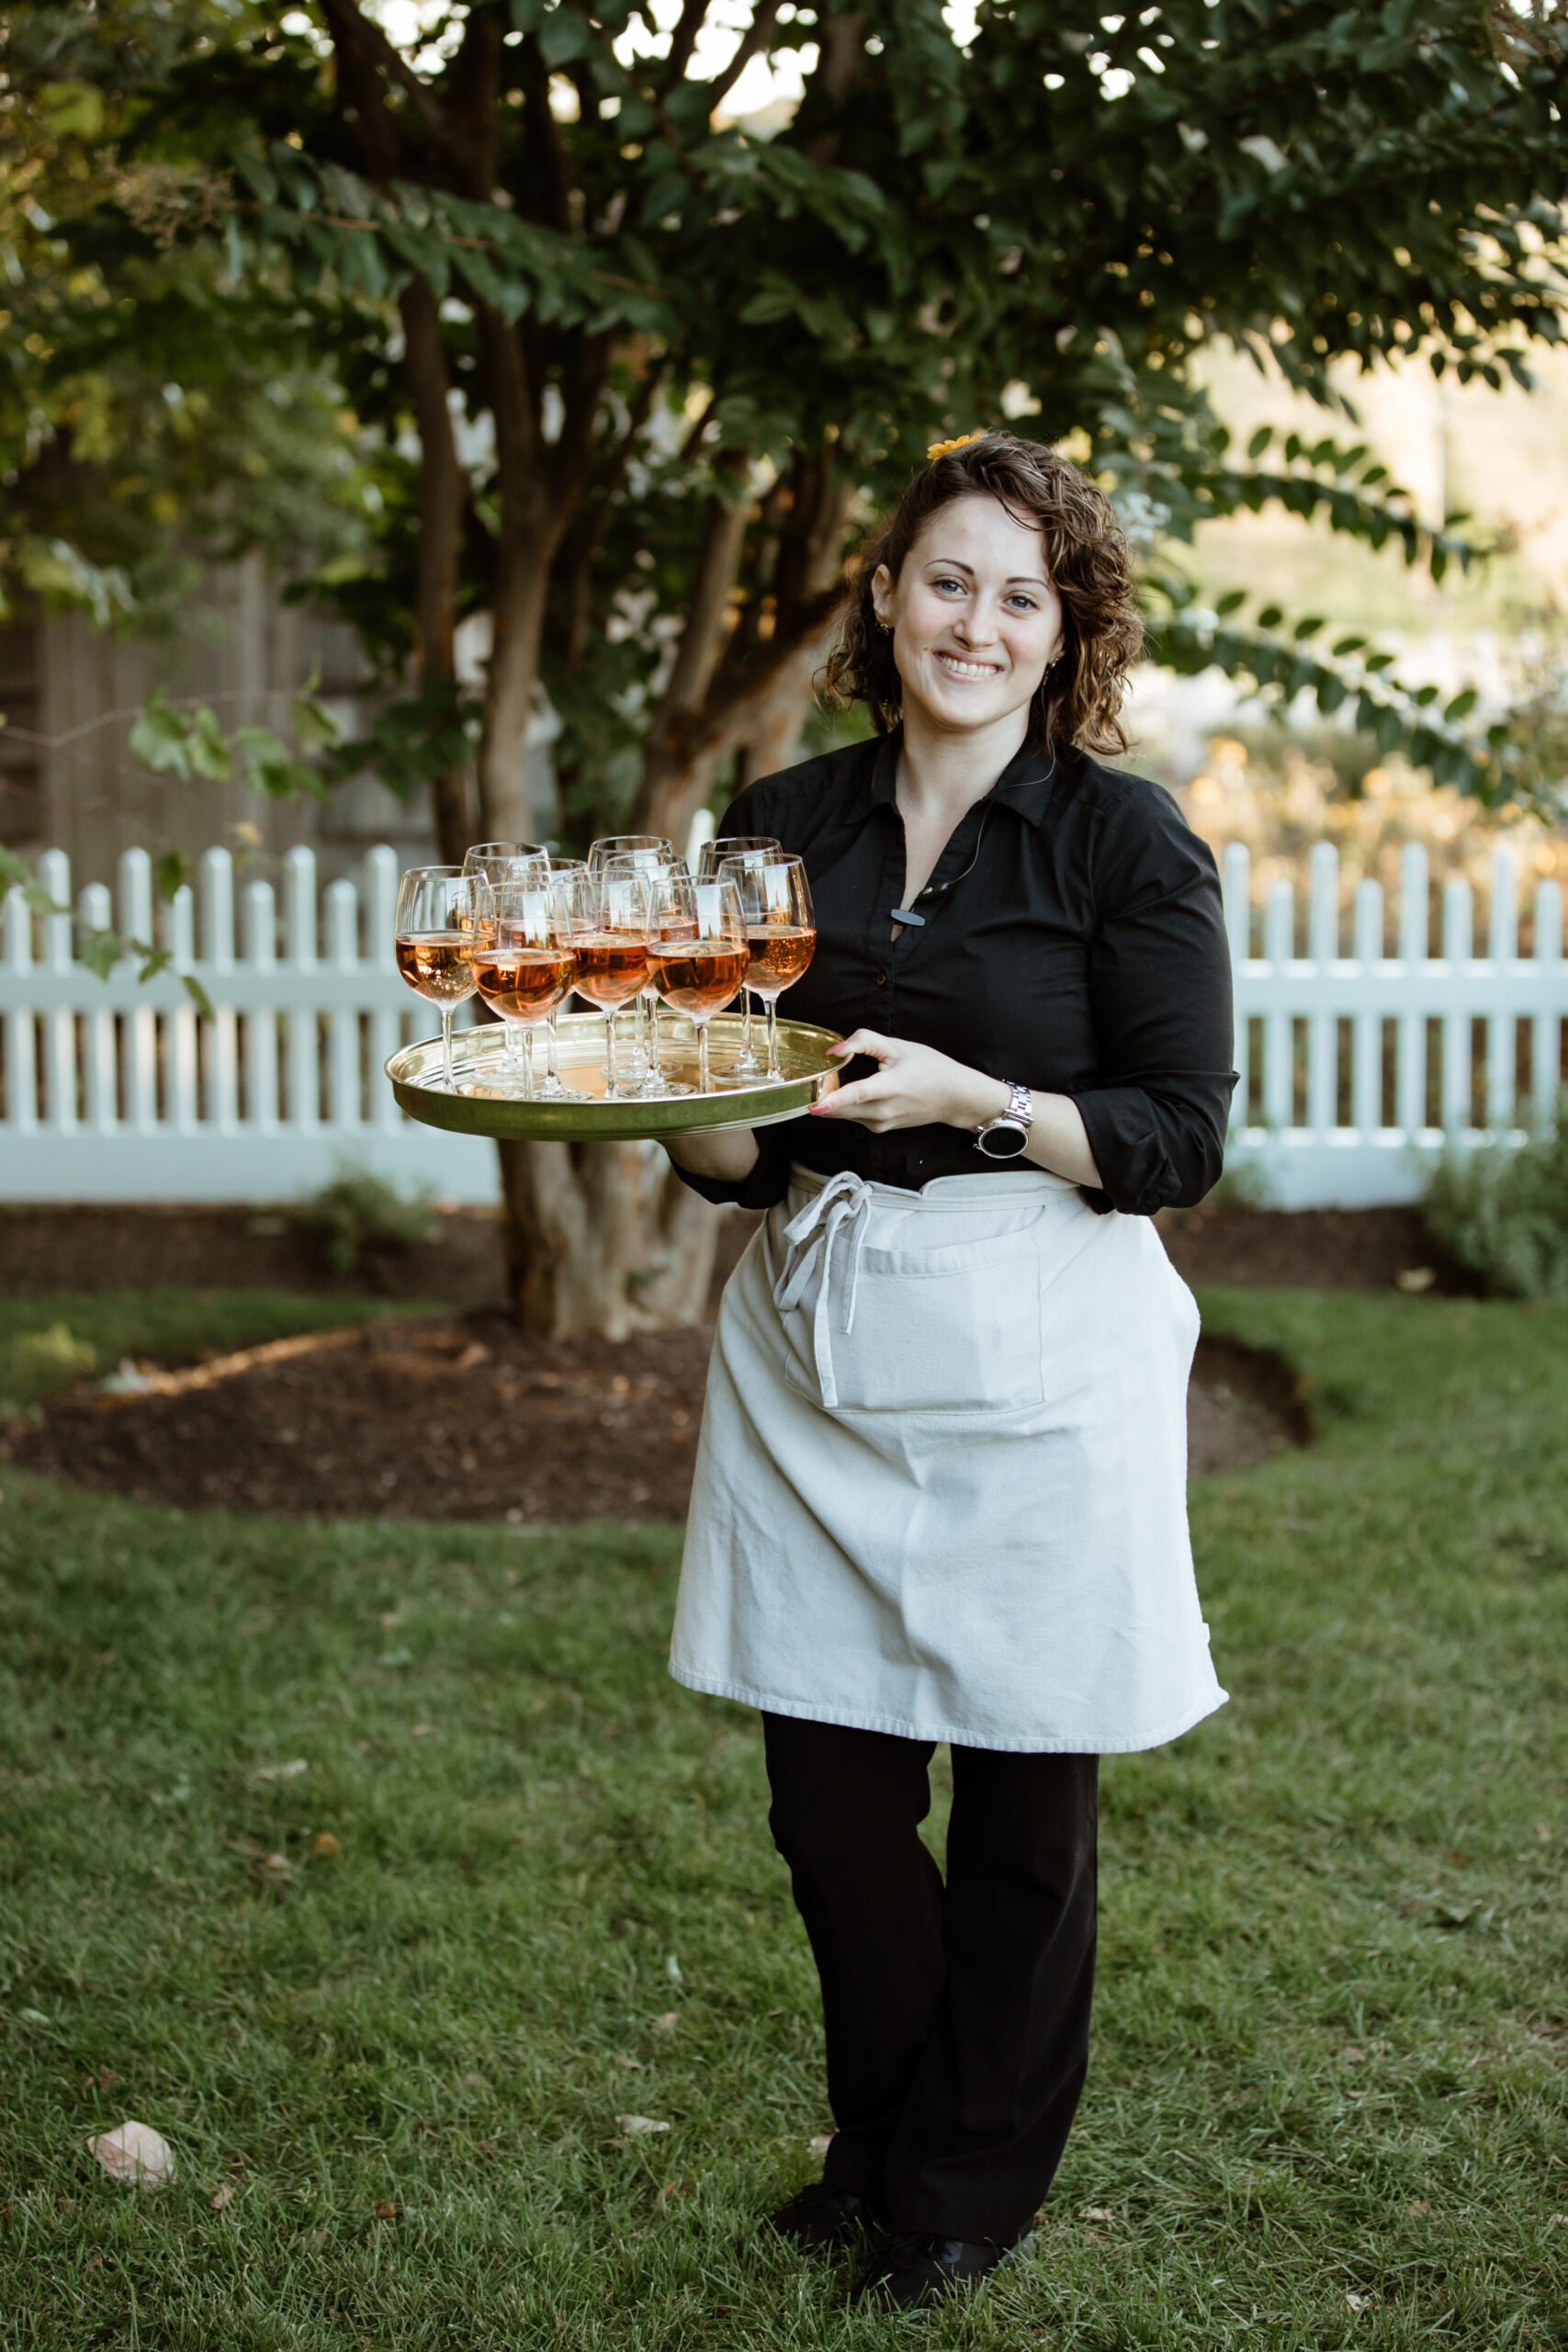 Bedell winery employee serves cocktails during cocktail hour at the stunning Bedell Winery wedding!